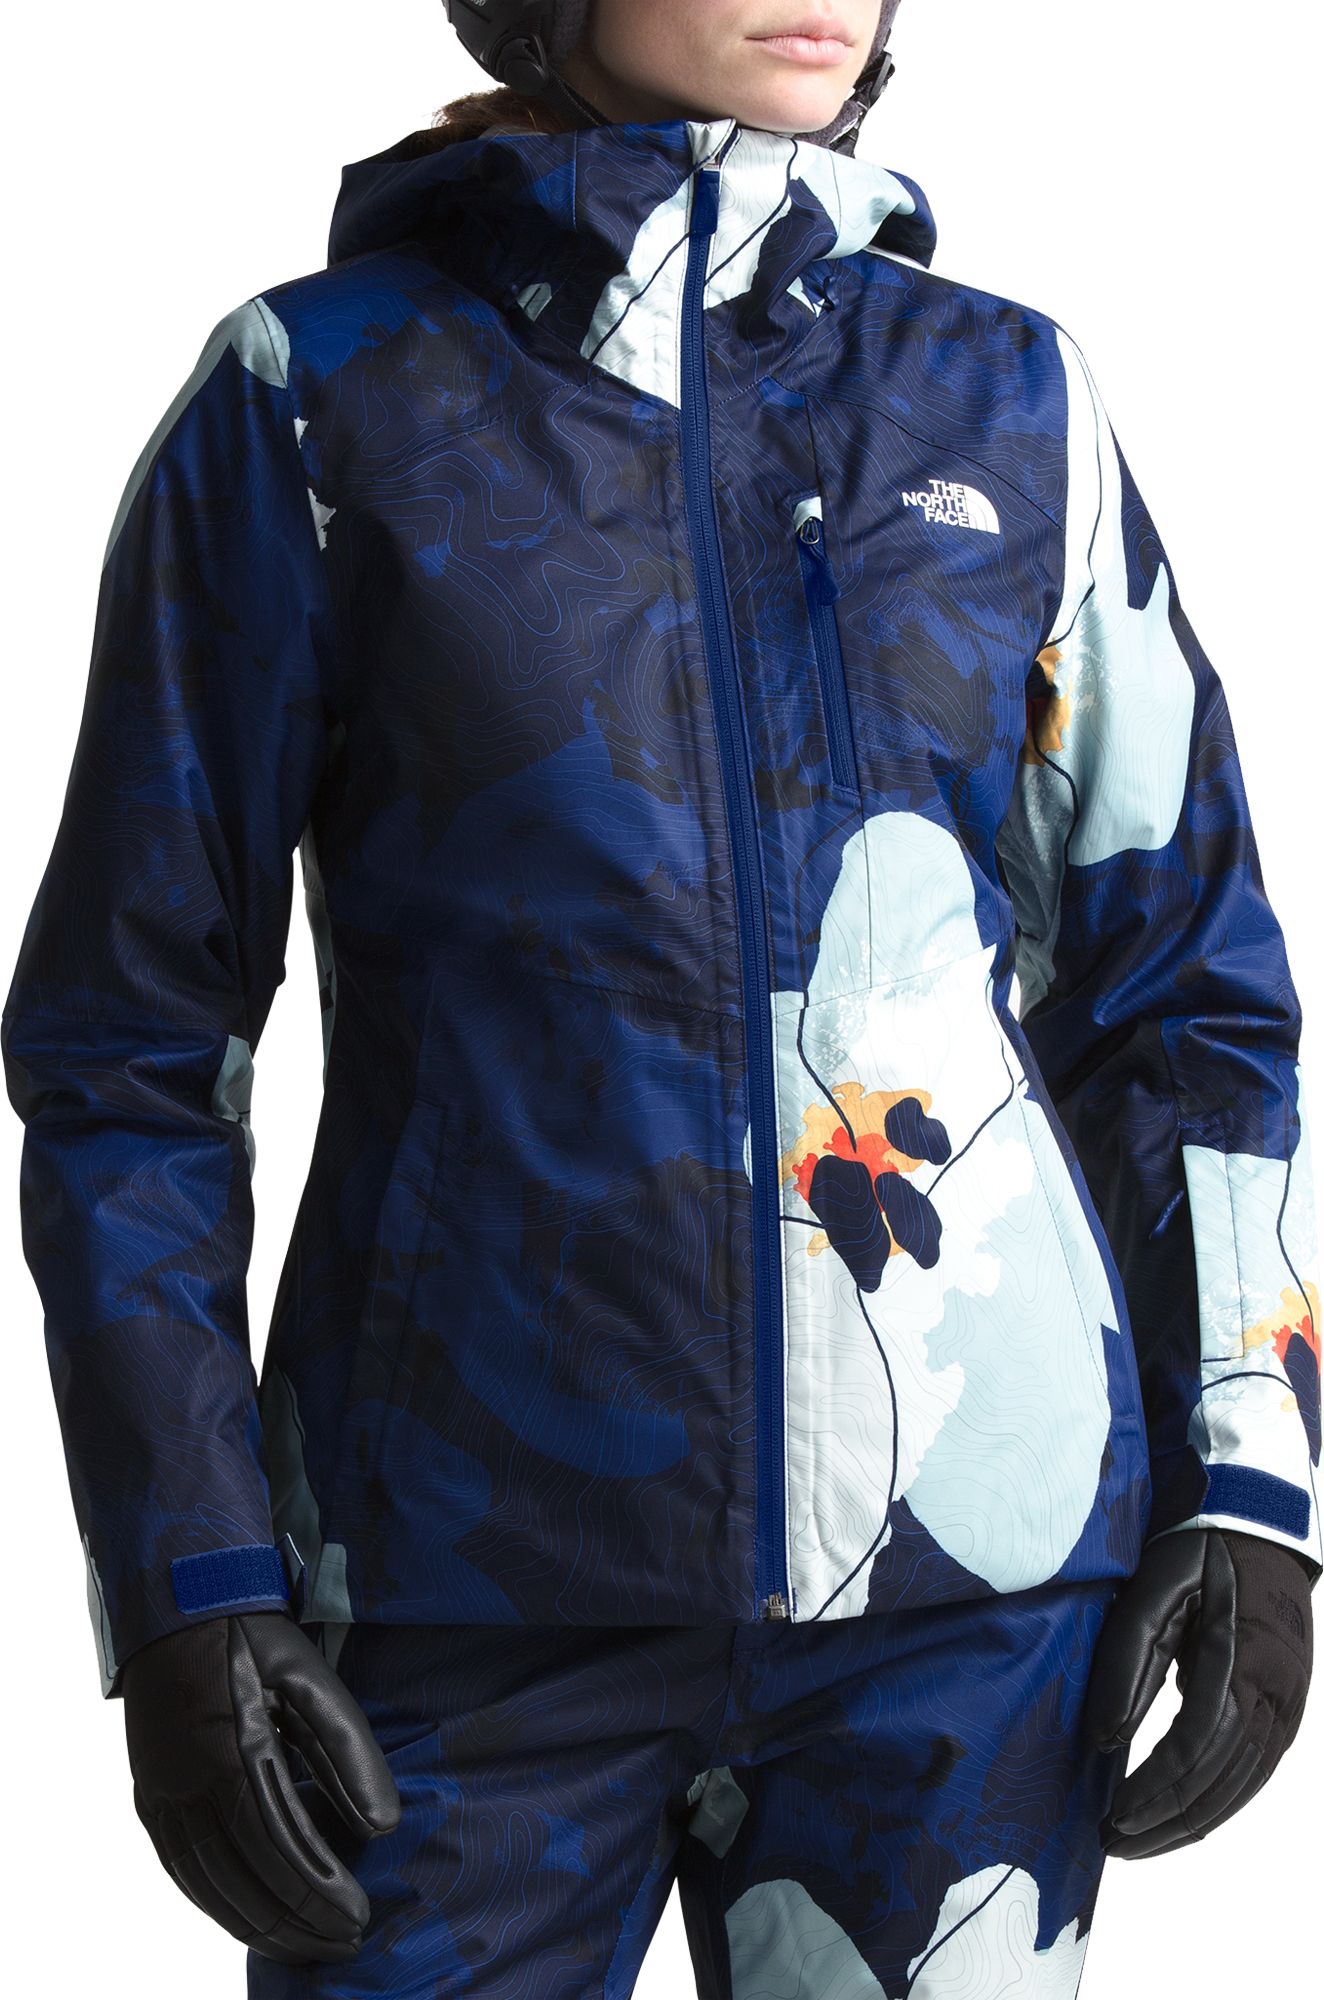 the north face women's clementine triclimate jacket